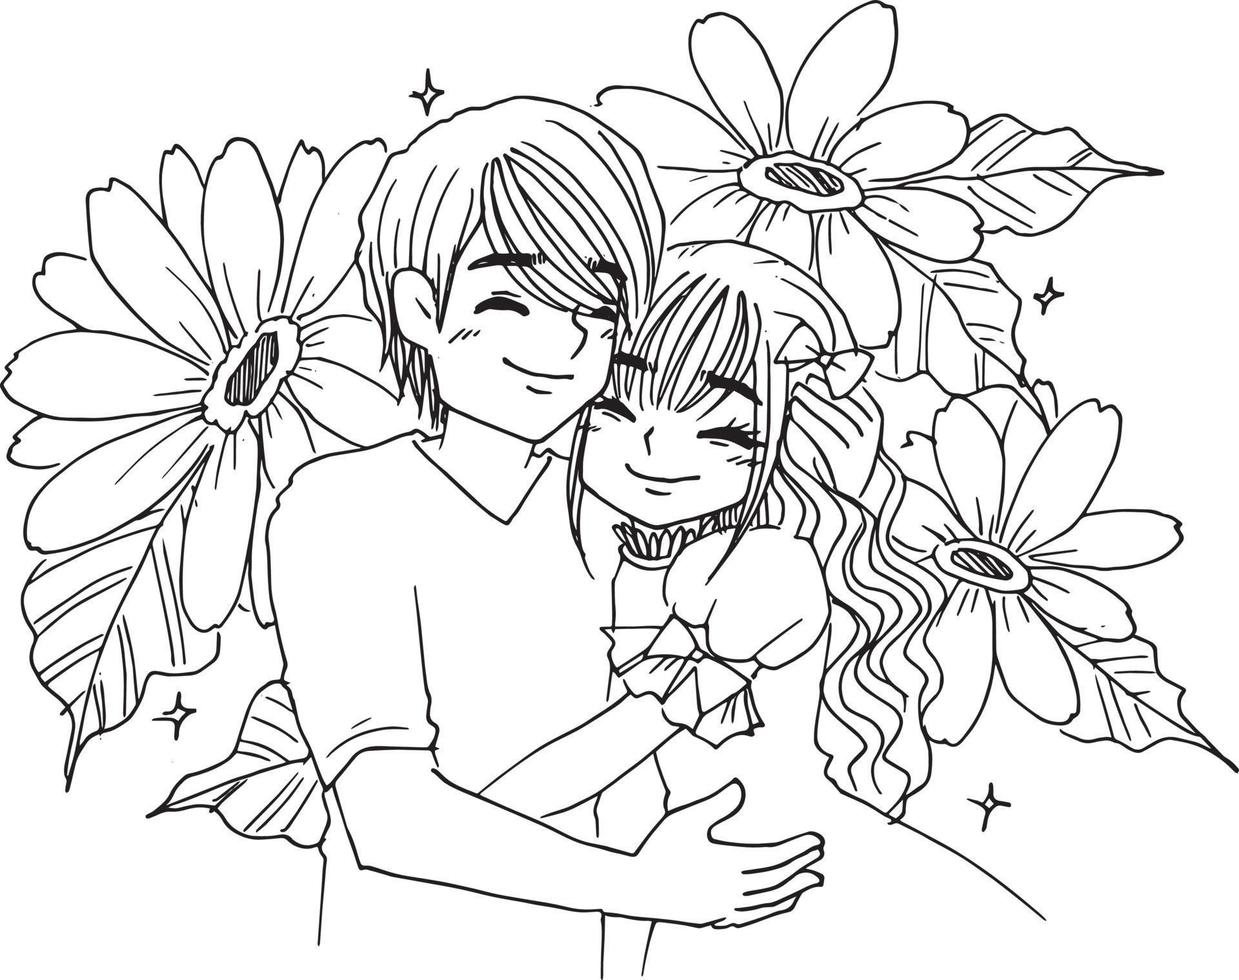 Anime Couple Coloring Pages  Free coloring pages